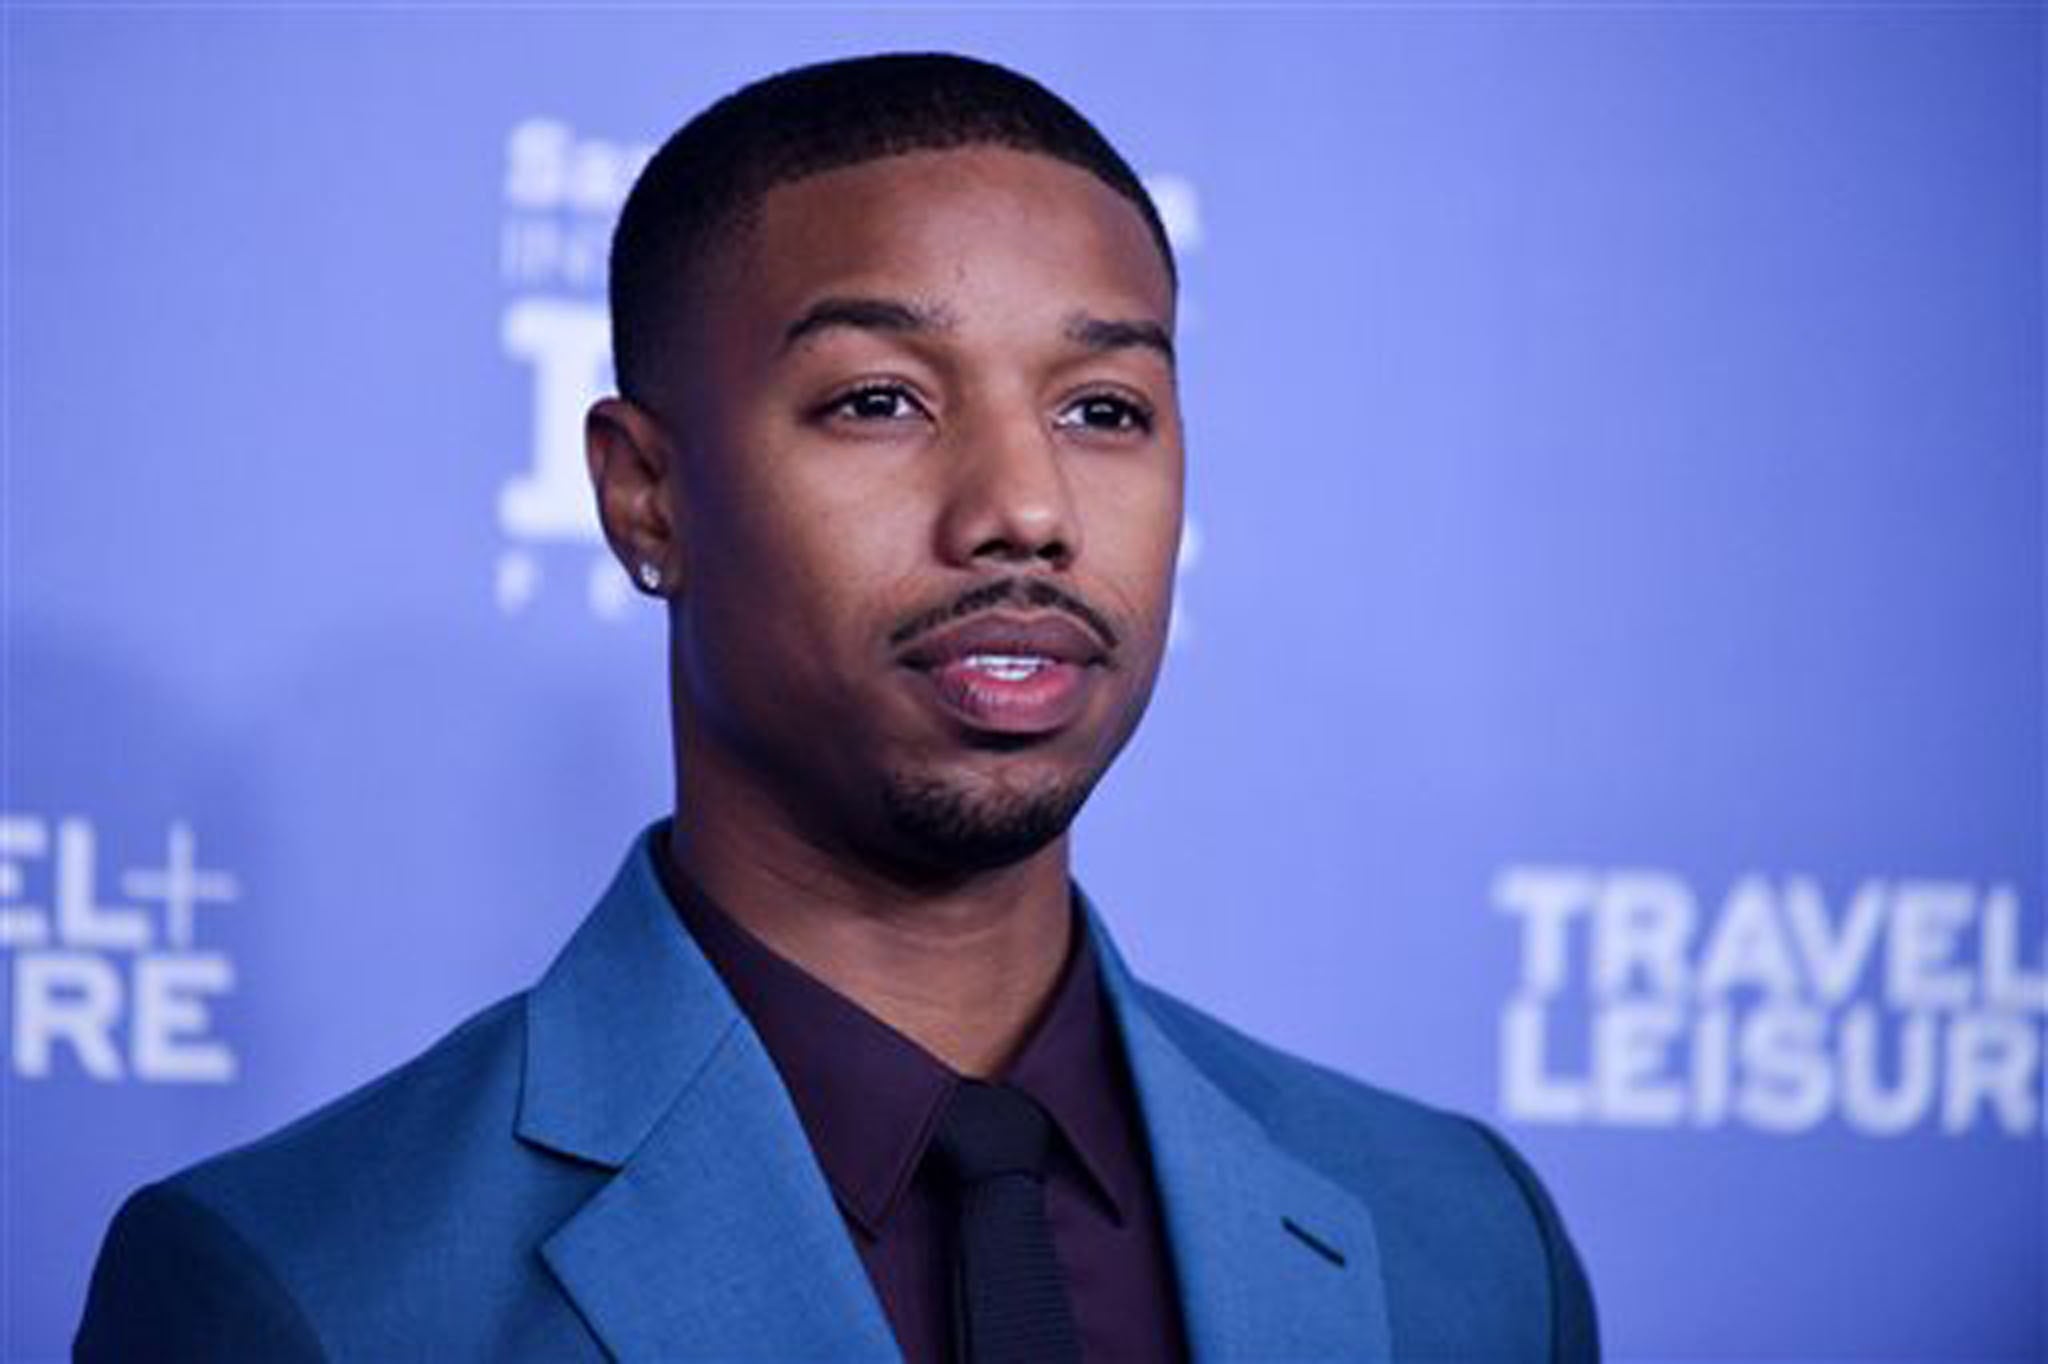 Michael B Jordan has responded to criticism he shouldn't play a 'traditionally white' character